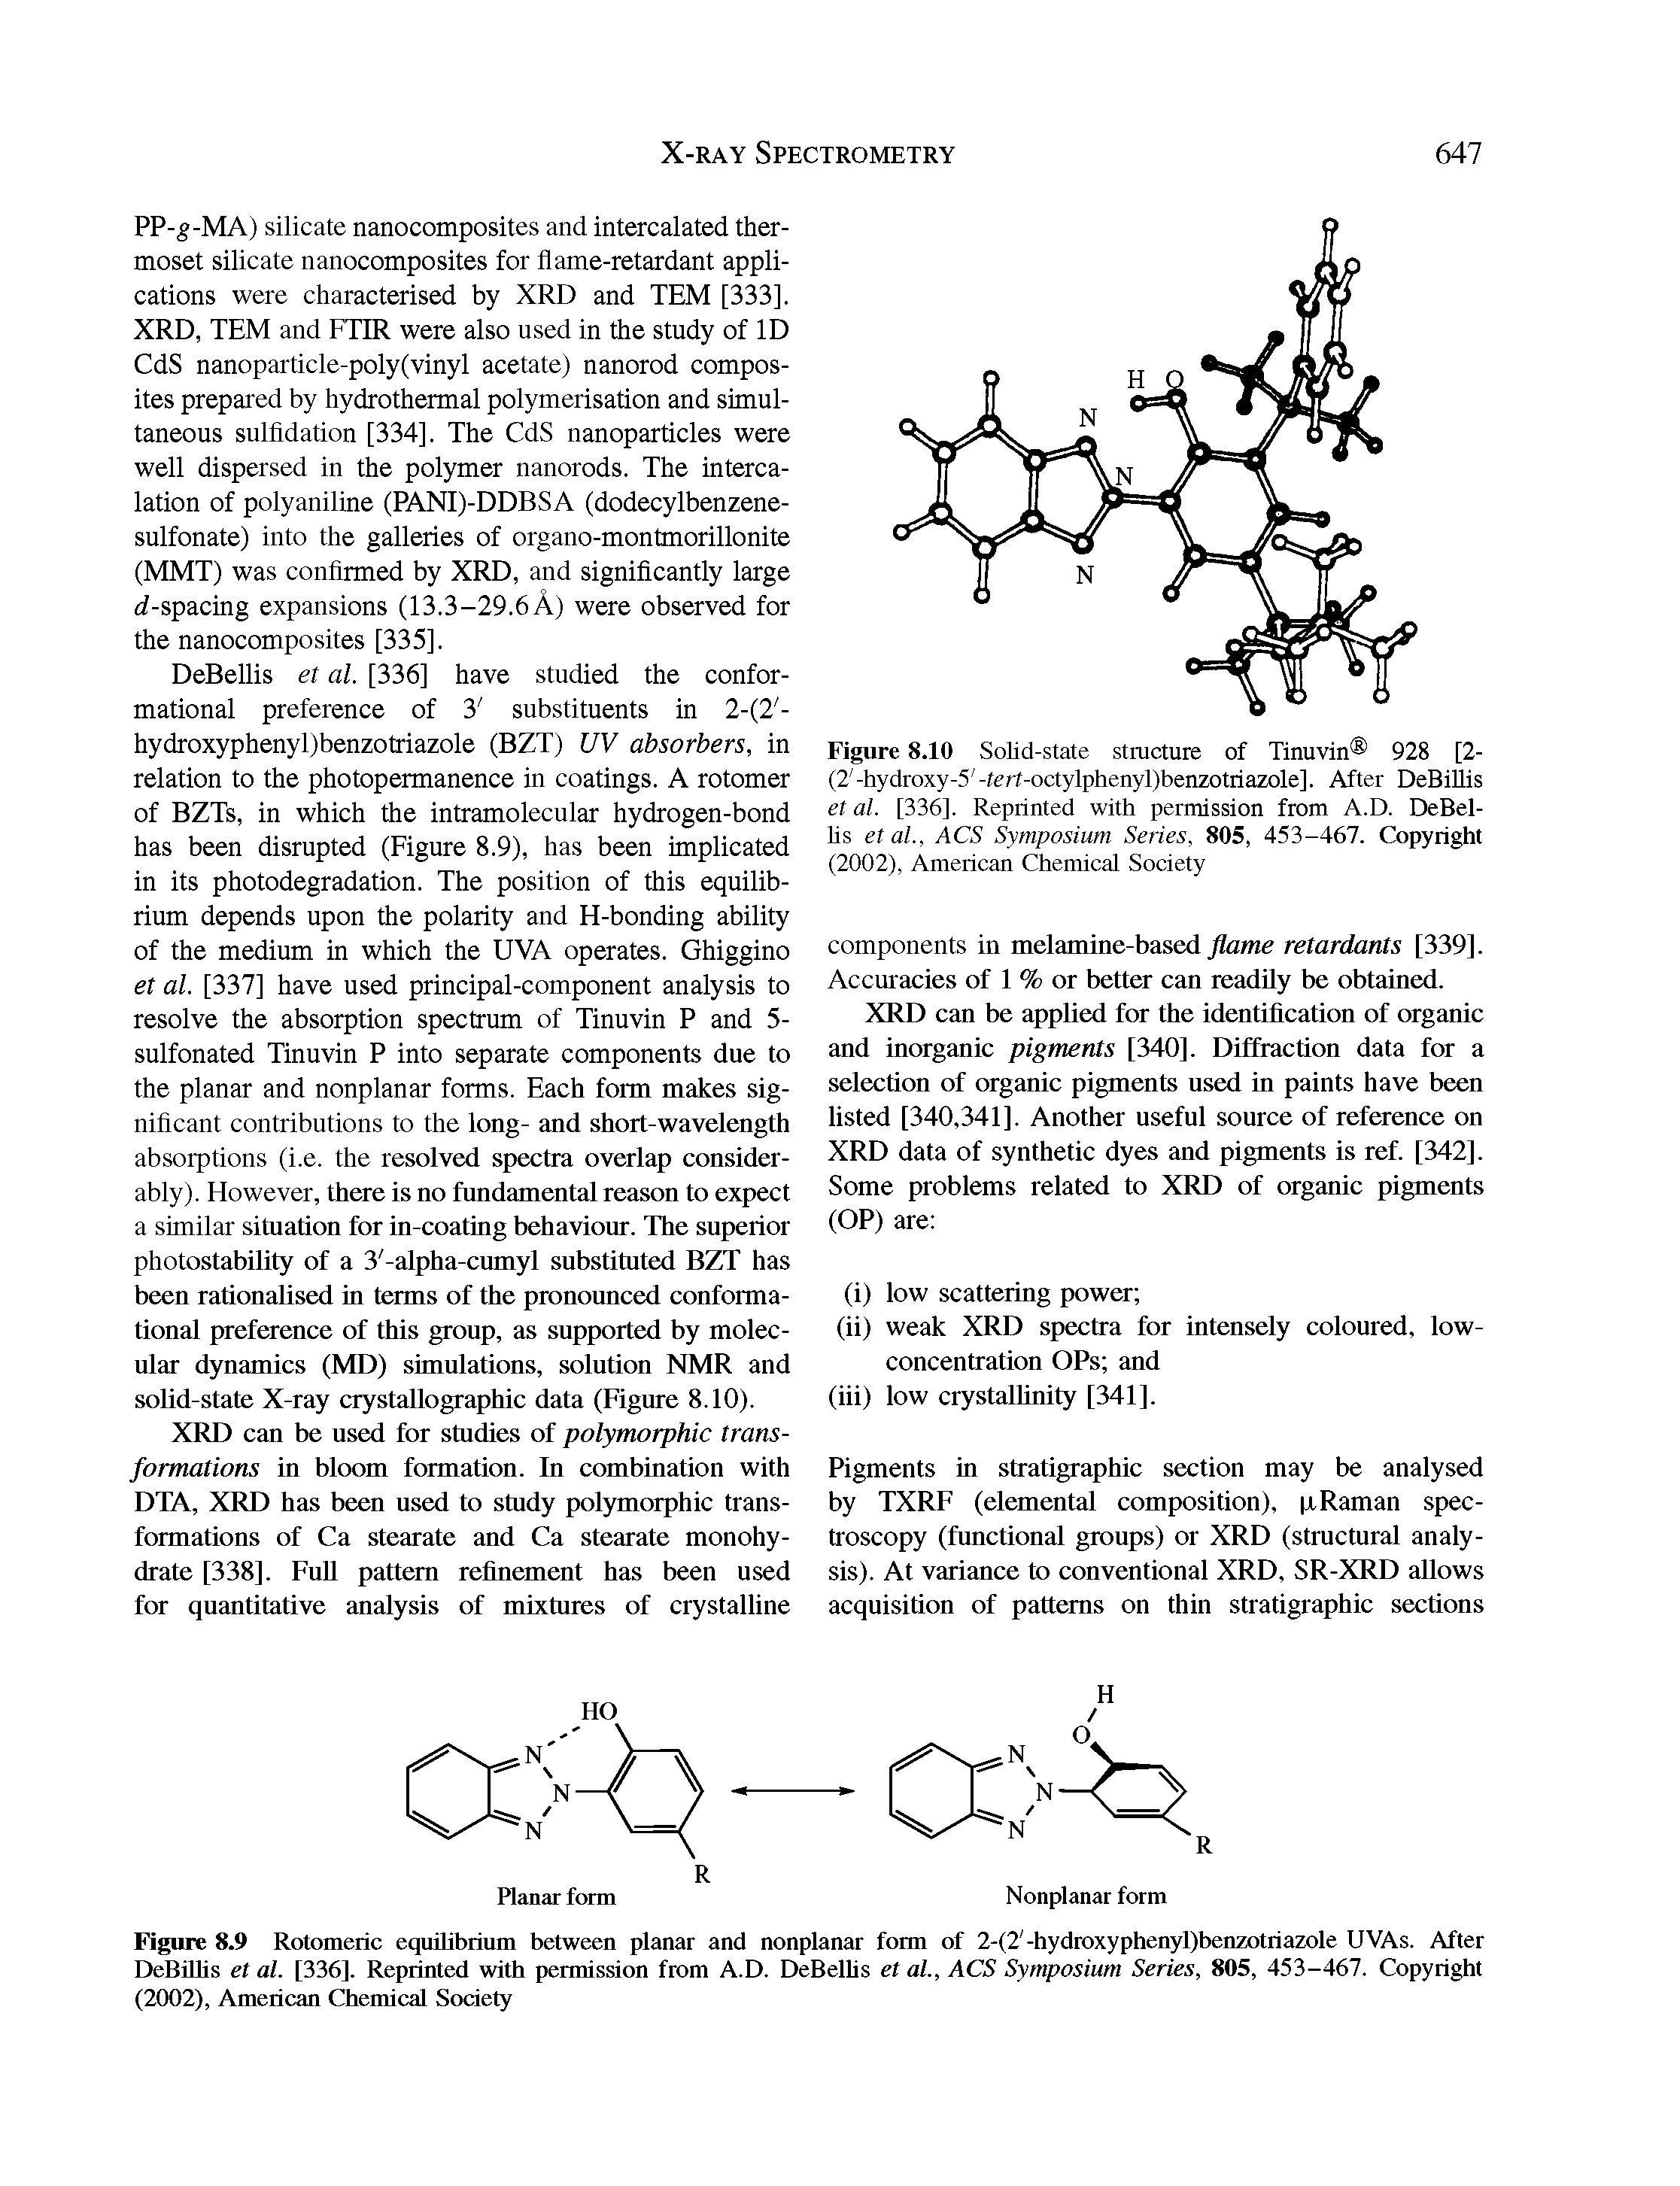 Figure 8.9 Rotomeric equilibrium between planar and nonplanar form of 2-(2 -hydroxyphenyl)benzotriazole UVAs. After DeBillis et al. [336]. Reprinted with permission from A.D. DeBellis et al., ACS Symposium Series, 805, 453-467. Copyright (2002), American Chemical Society...